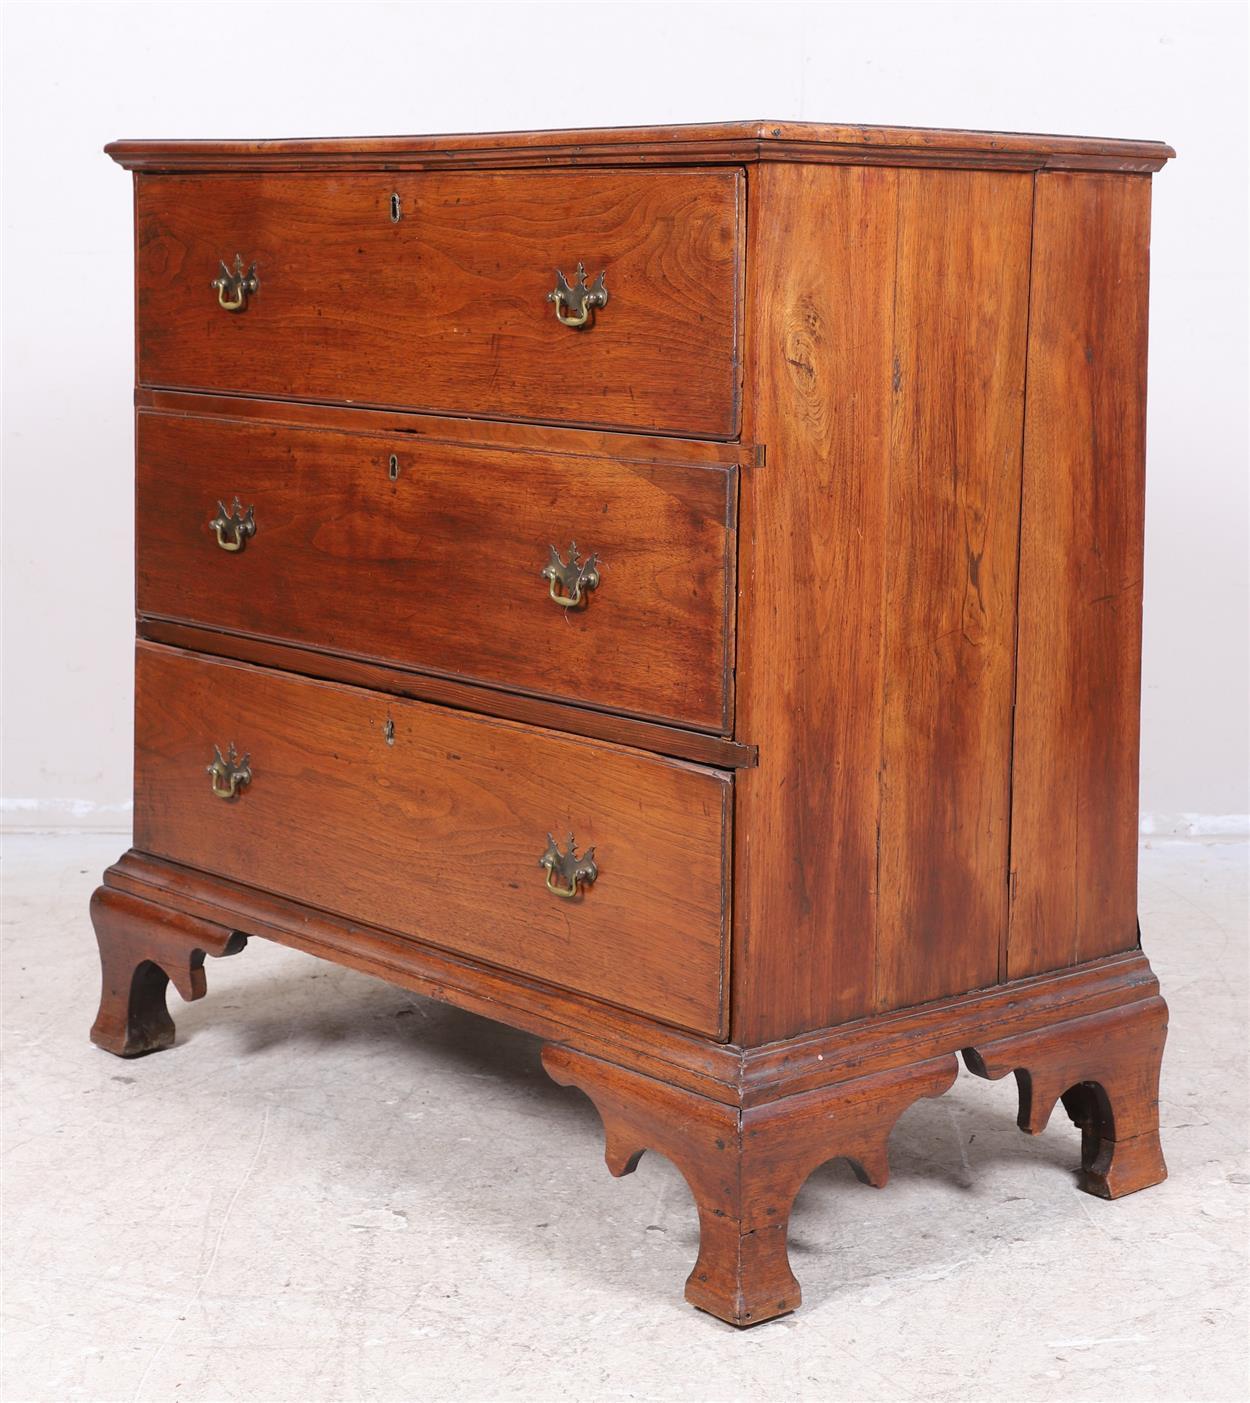 A charming colonial Southern chest in walnut. The surfaces of the chest are wonderfully worn and patinated. The theatrical feet are also original to the piece and are of uncommon form as is the arrangement of three graduated drawers. Virginia circa